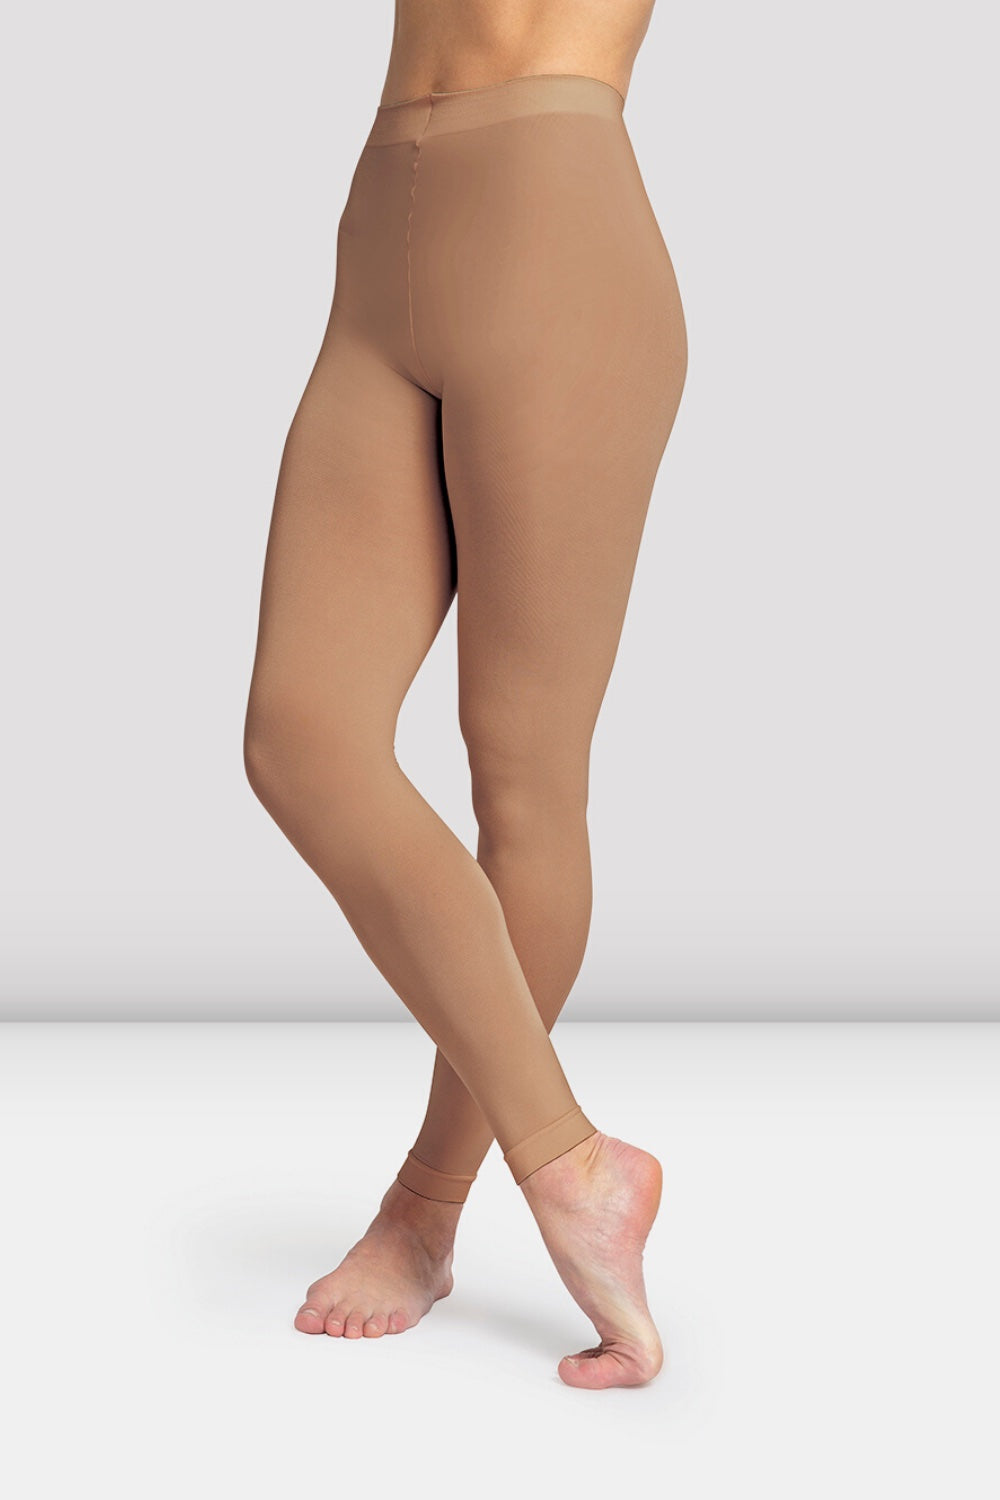 Bloch Contoursoft Footless Tights T0985 Made by Bloch (Style # T0985G)